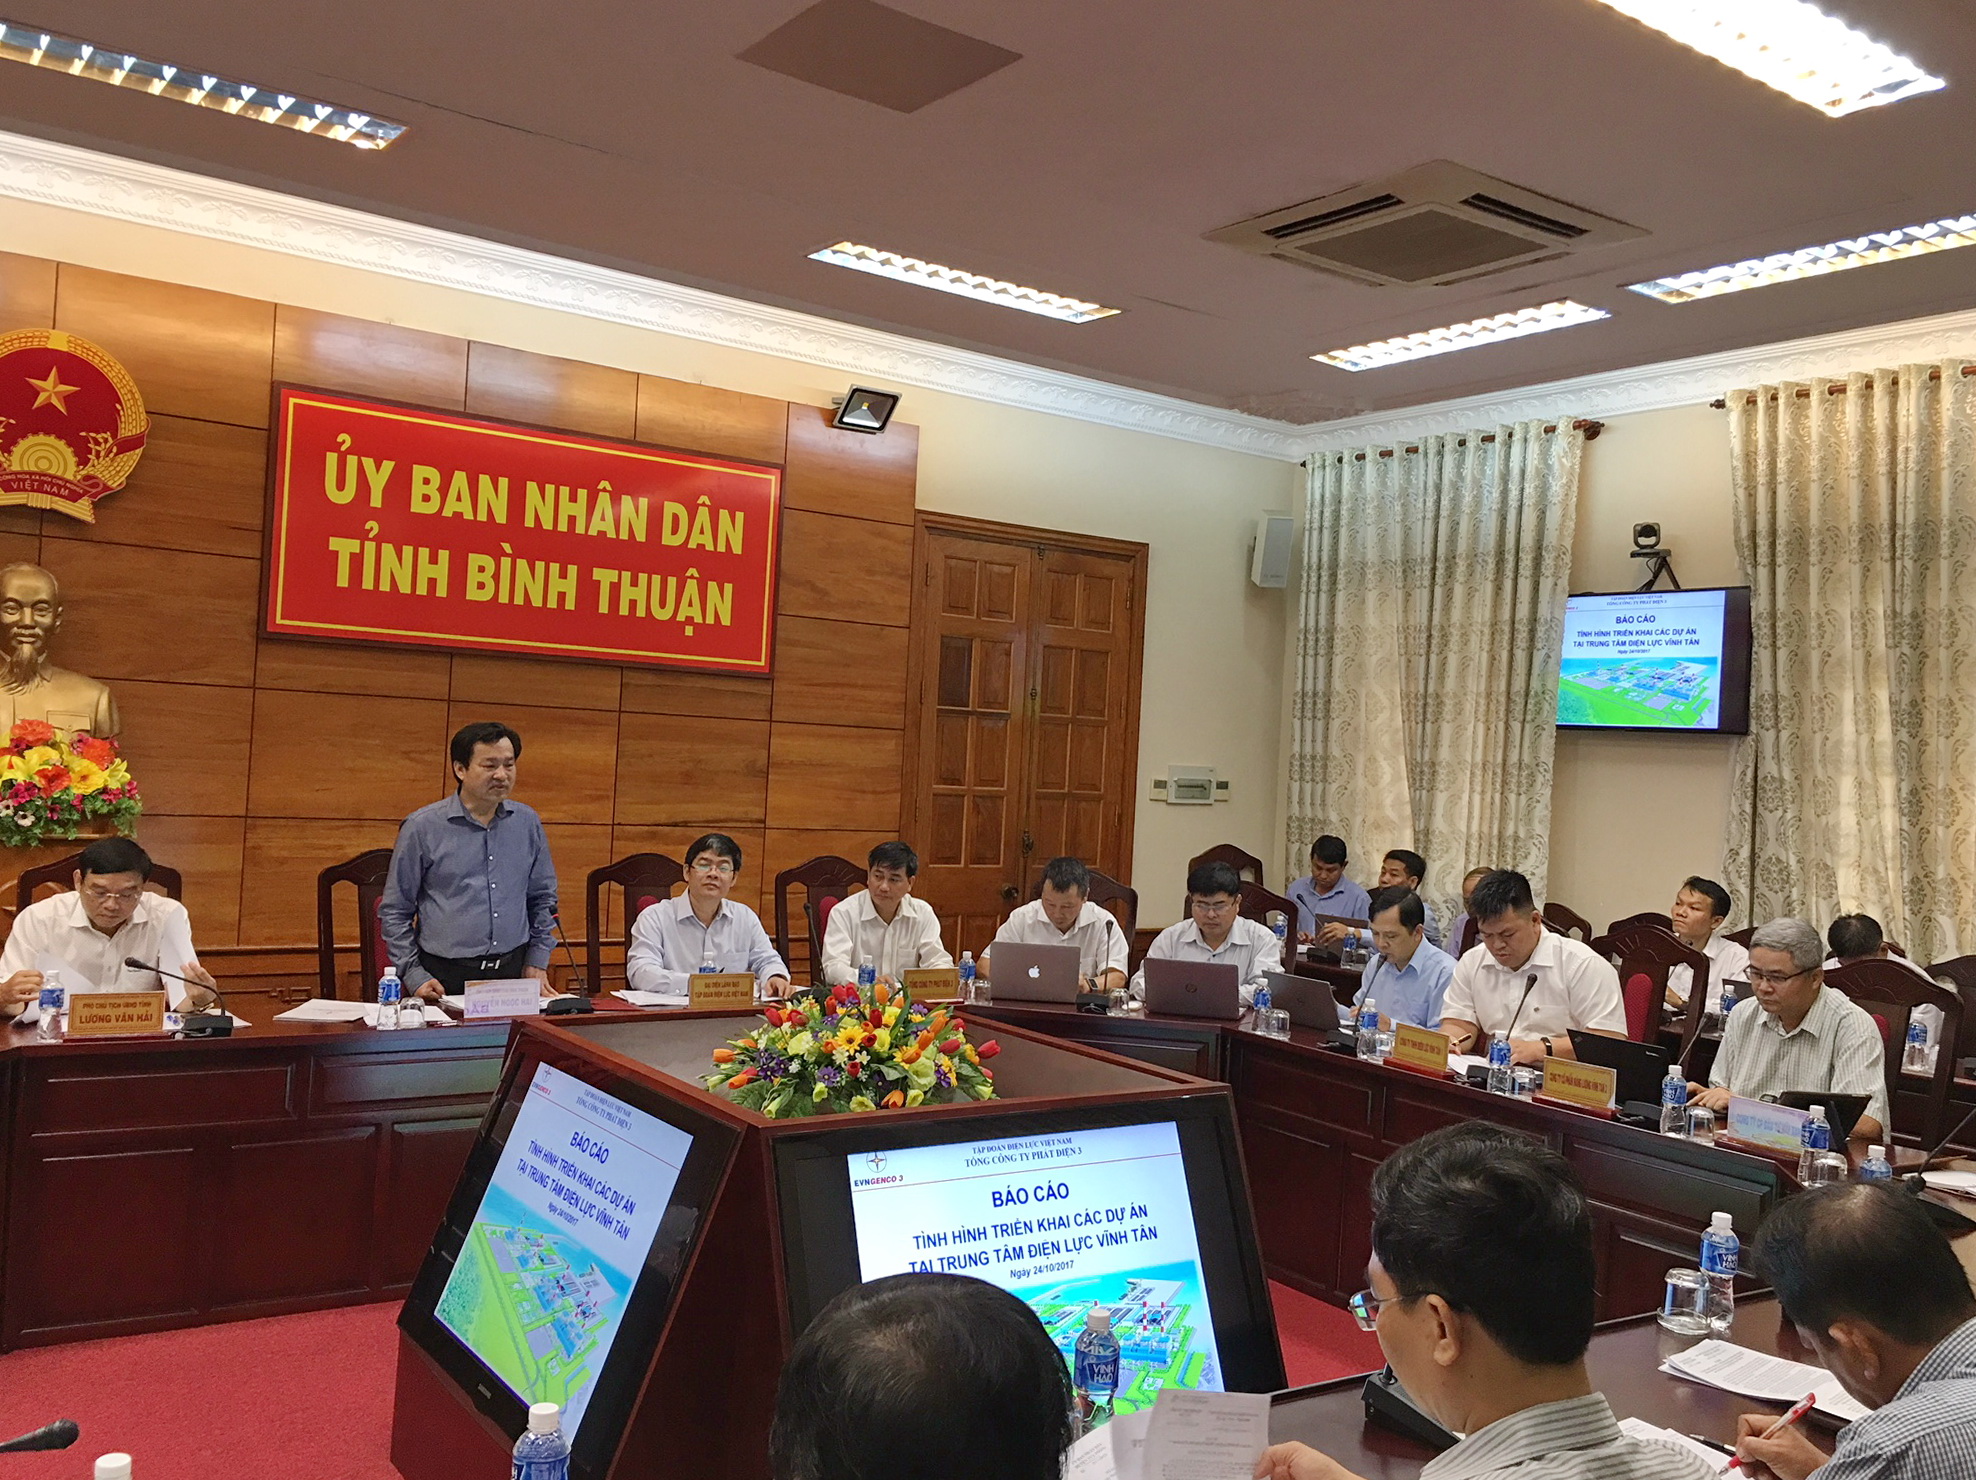 Binh Thuan People 's Committee compliments Vinh Tan 4 Thermal Power Plant on its effort to closely bring two units to commercial generation.